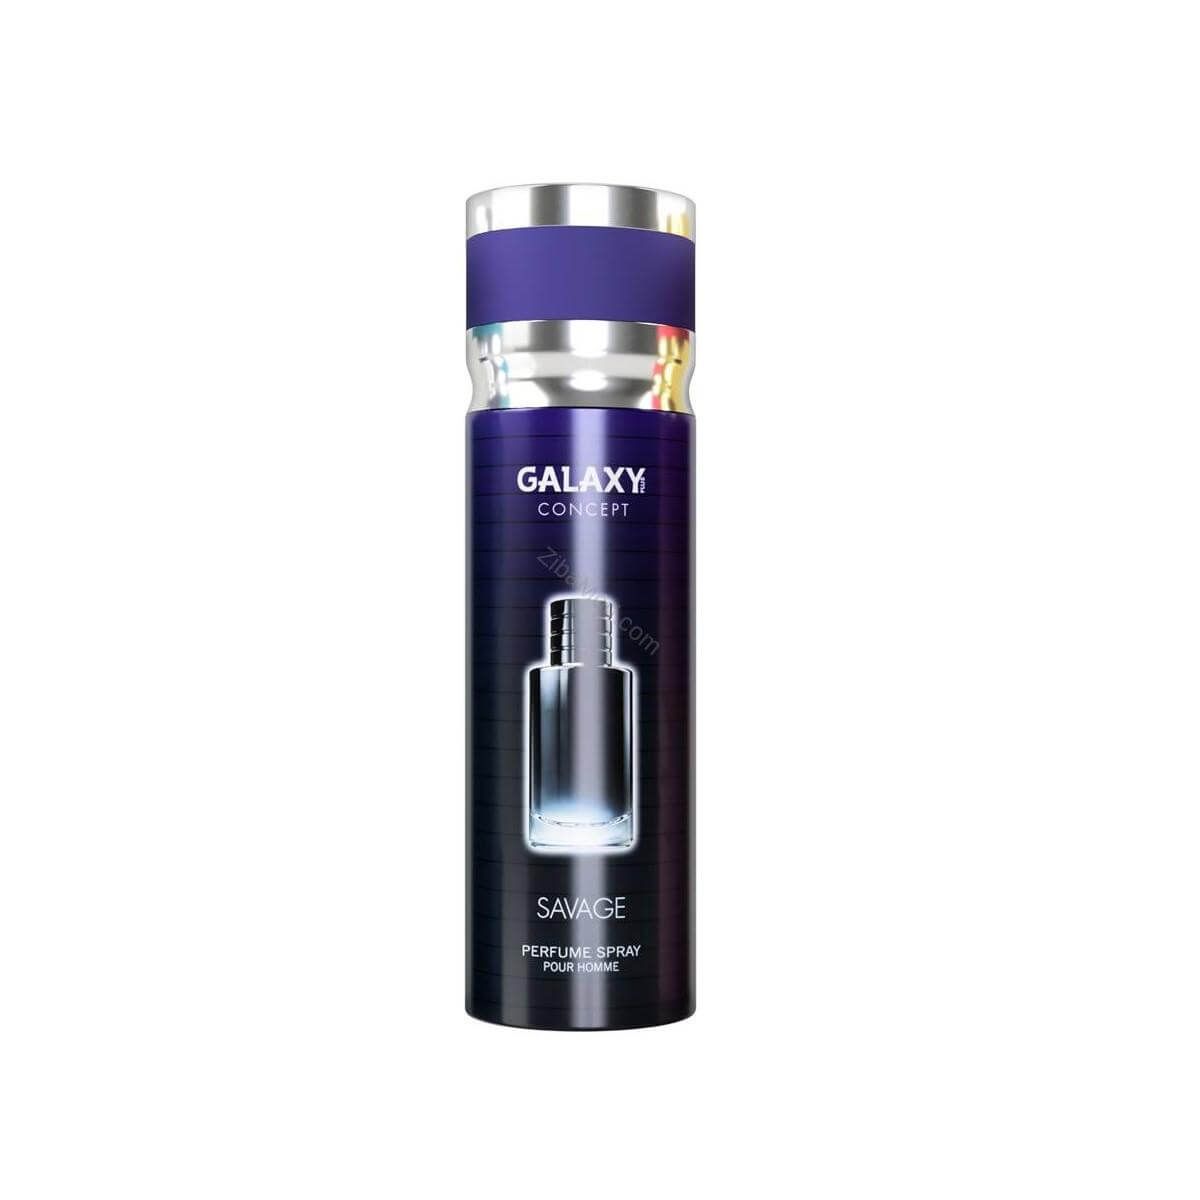 Galaxy Concept Savage 200Ml Perfume Spray Pour Homme (Inspired By Dior Sauvage)